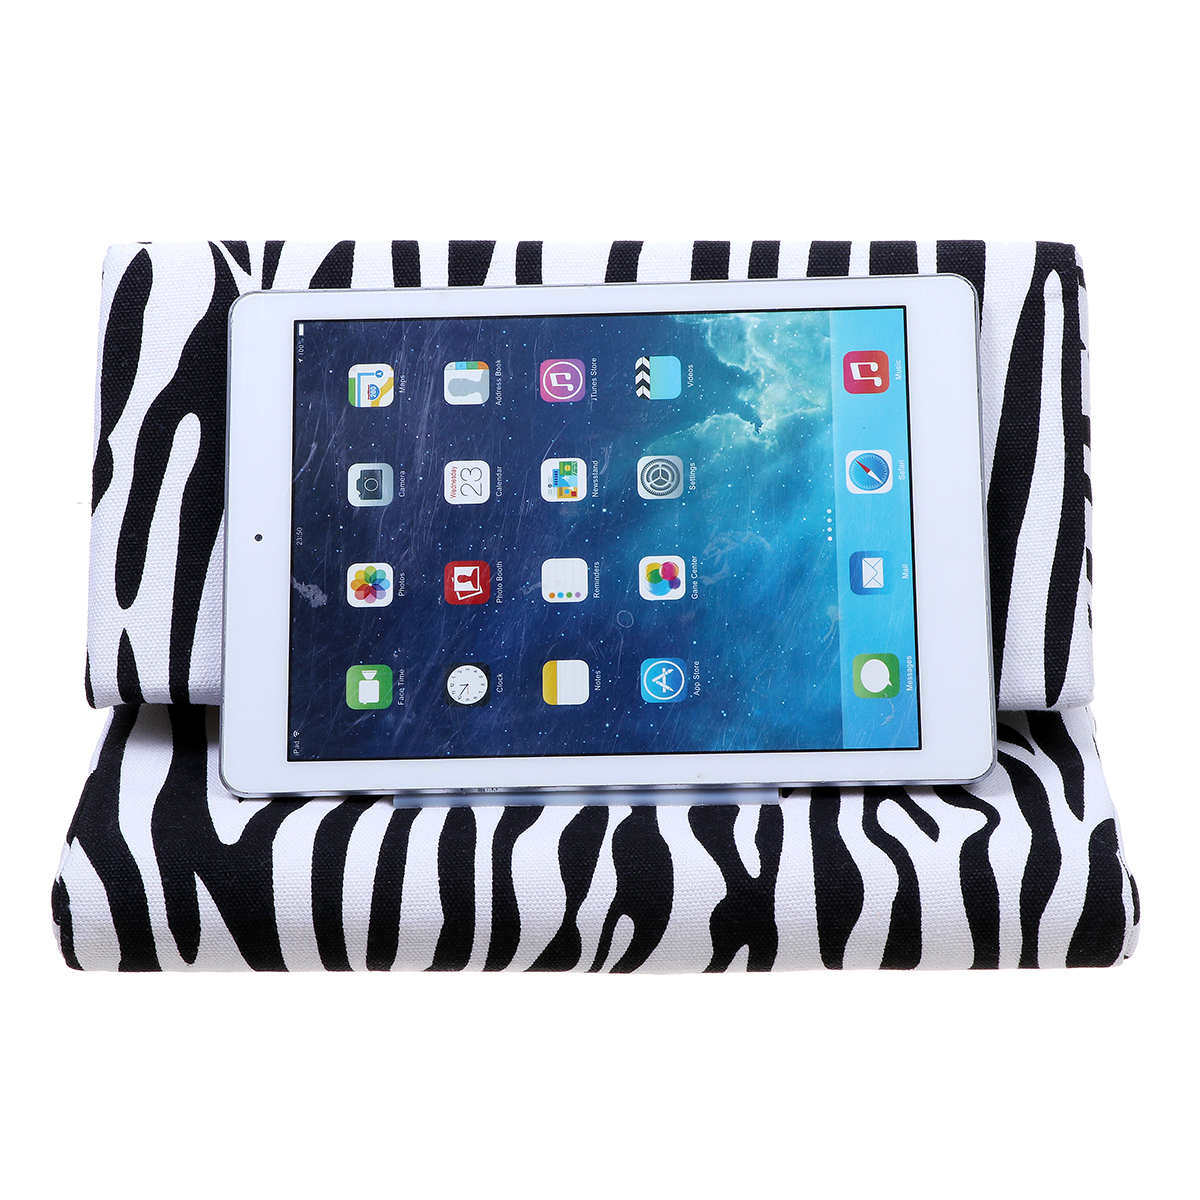 Find Folding Notebook Stand Multifunction Laptop Cooling Pad Tablet Cushion Lap Rest Cushion for Laptop Magazines Books for Sale on Gipsybee.com with cryptocurrencies